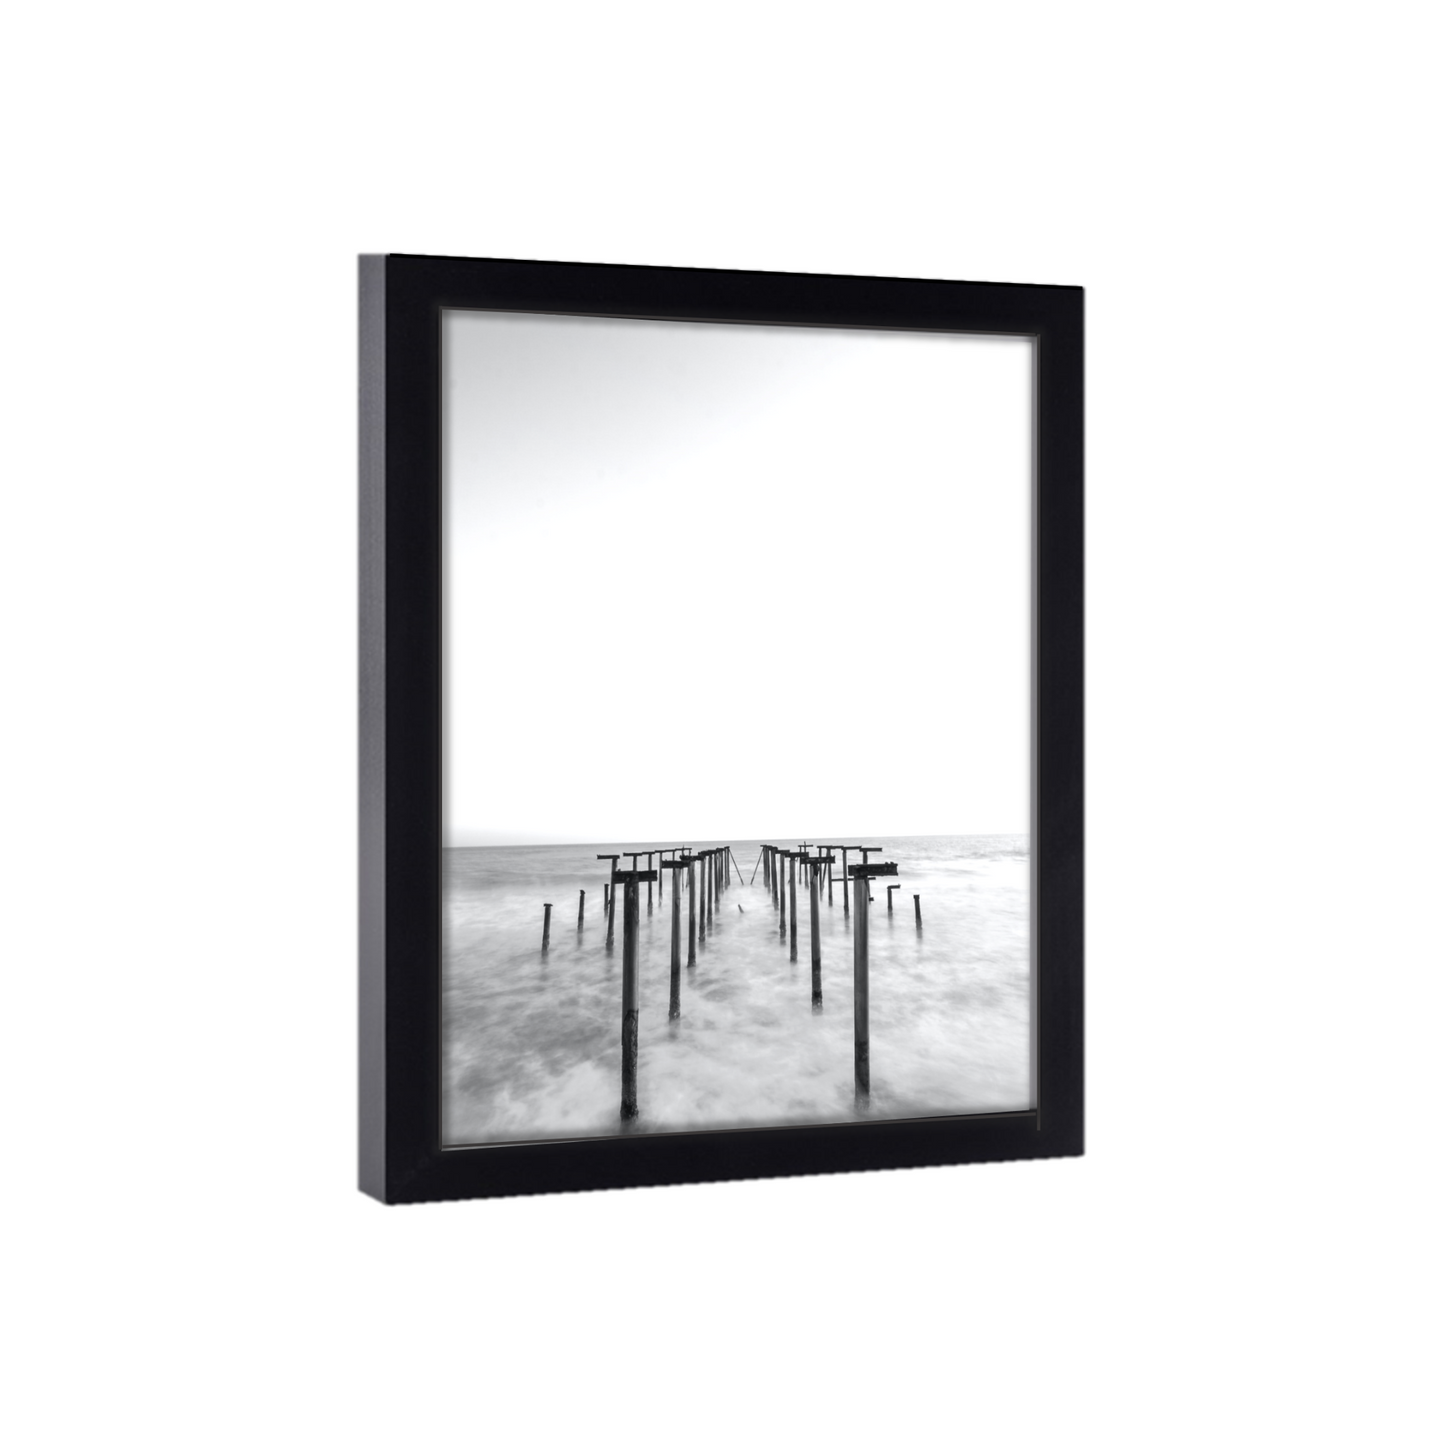 Gallery Wall 31x32 Picture Frame Black Wood 31x32  Poster Size